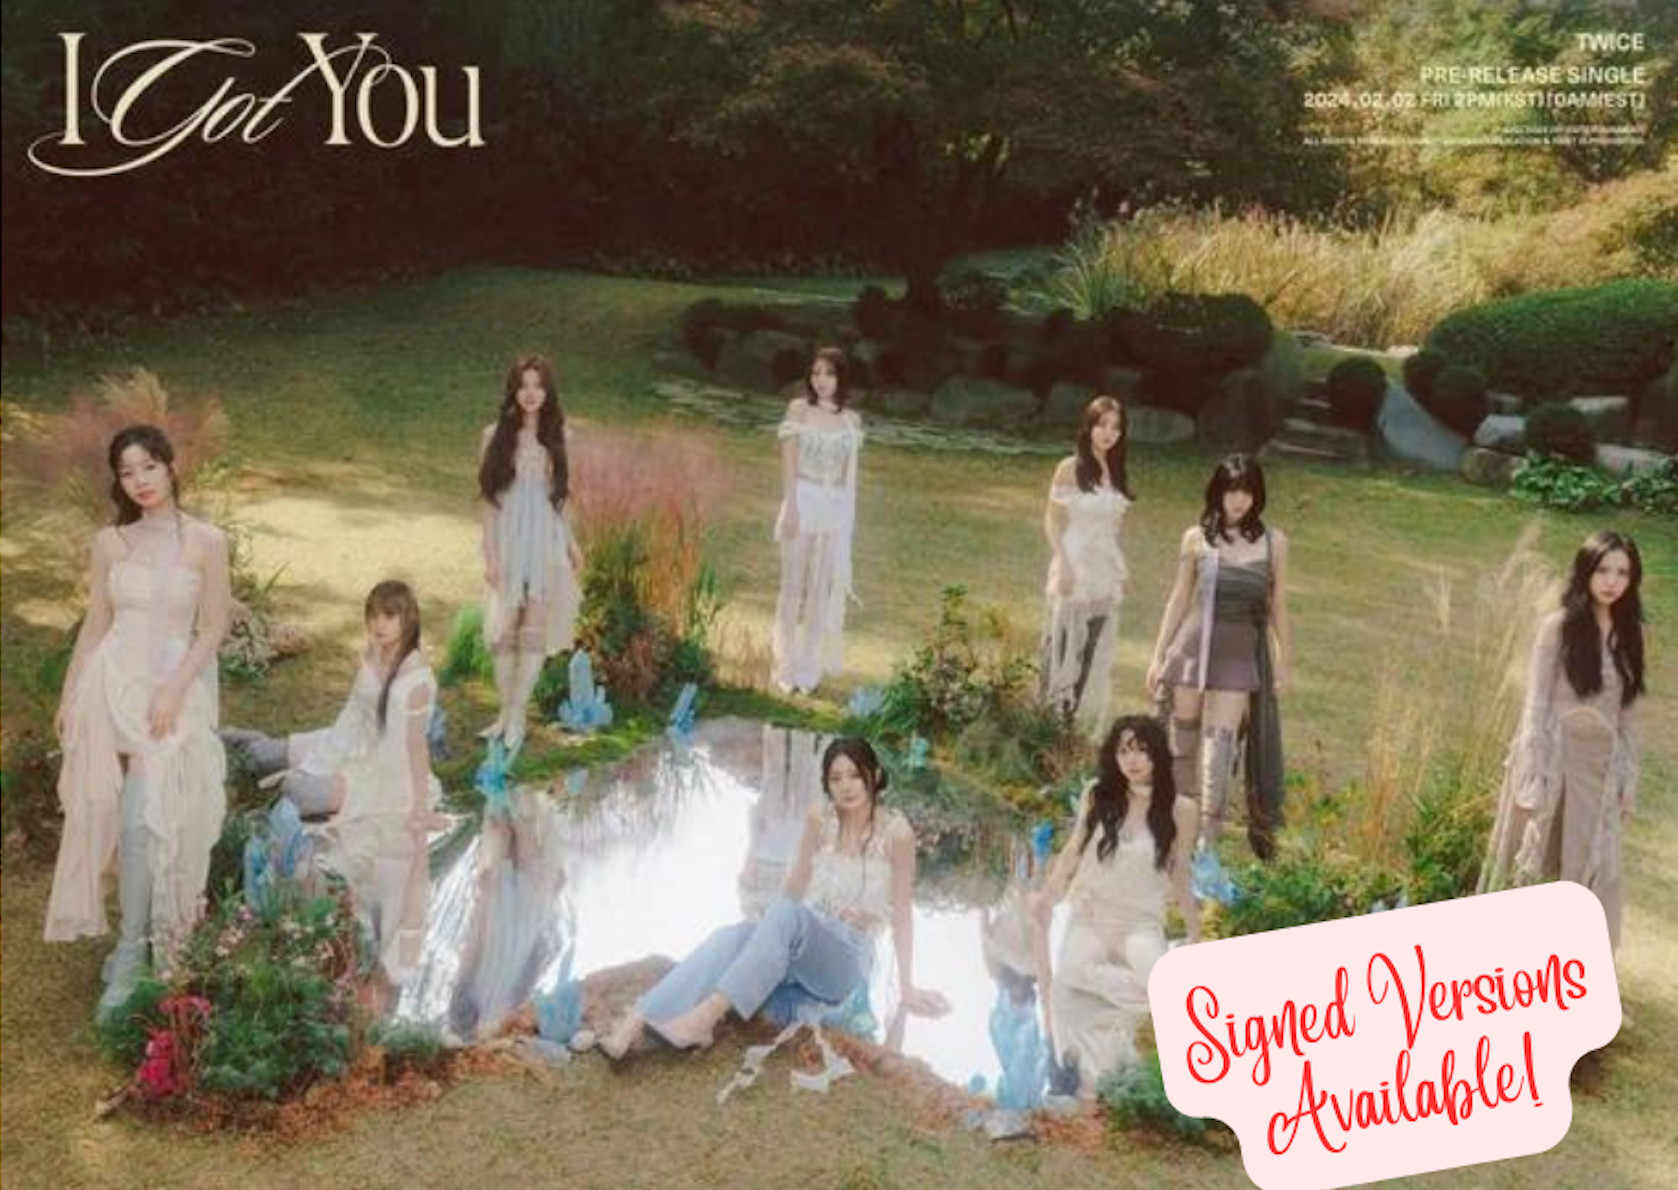 TWICE releases 13th mini-album 'With YOU-th